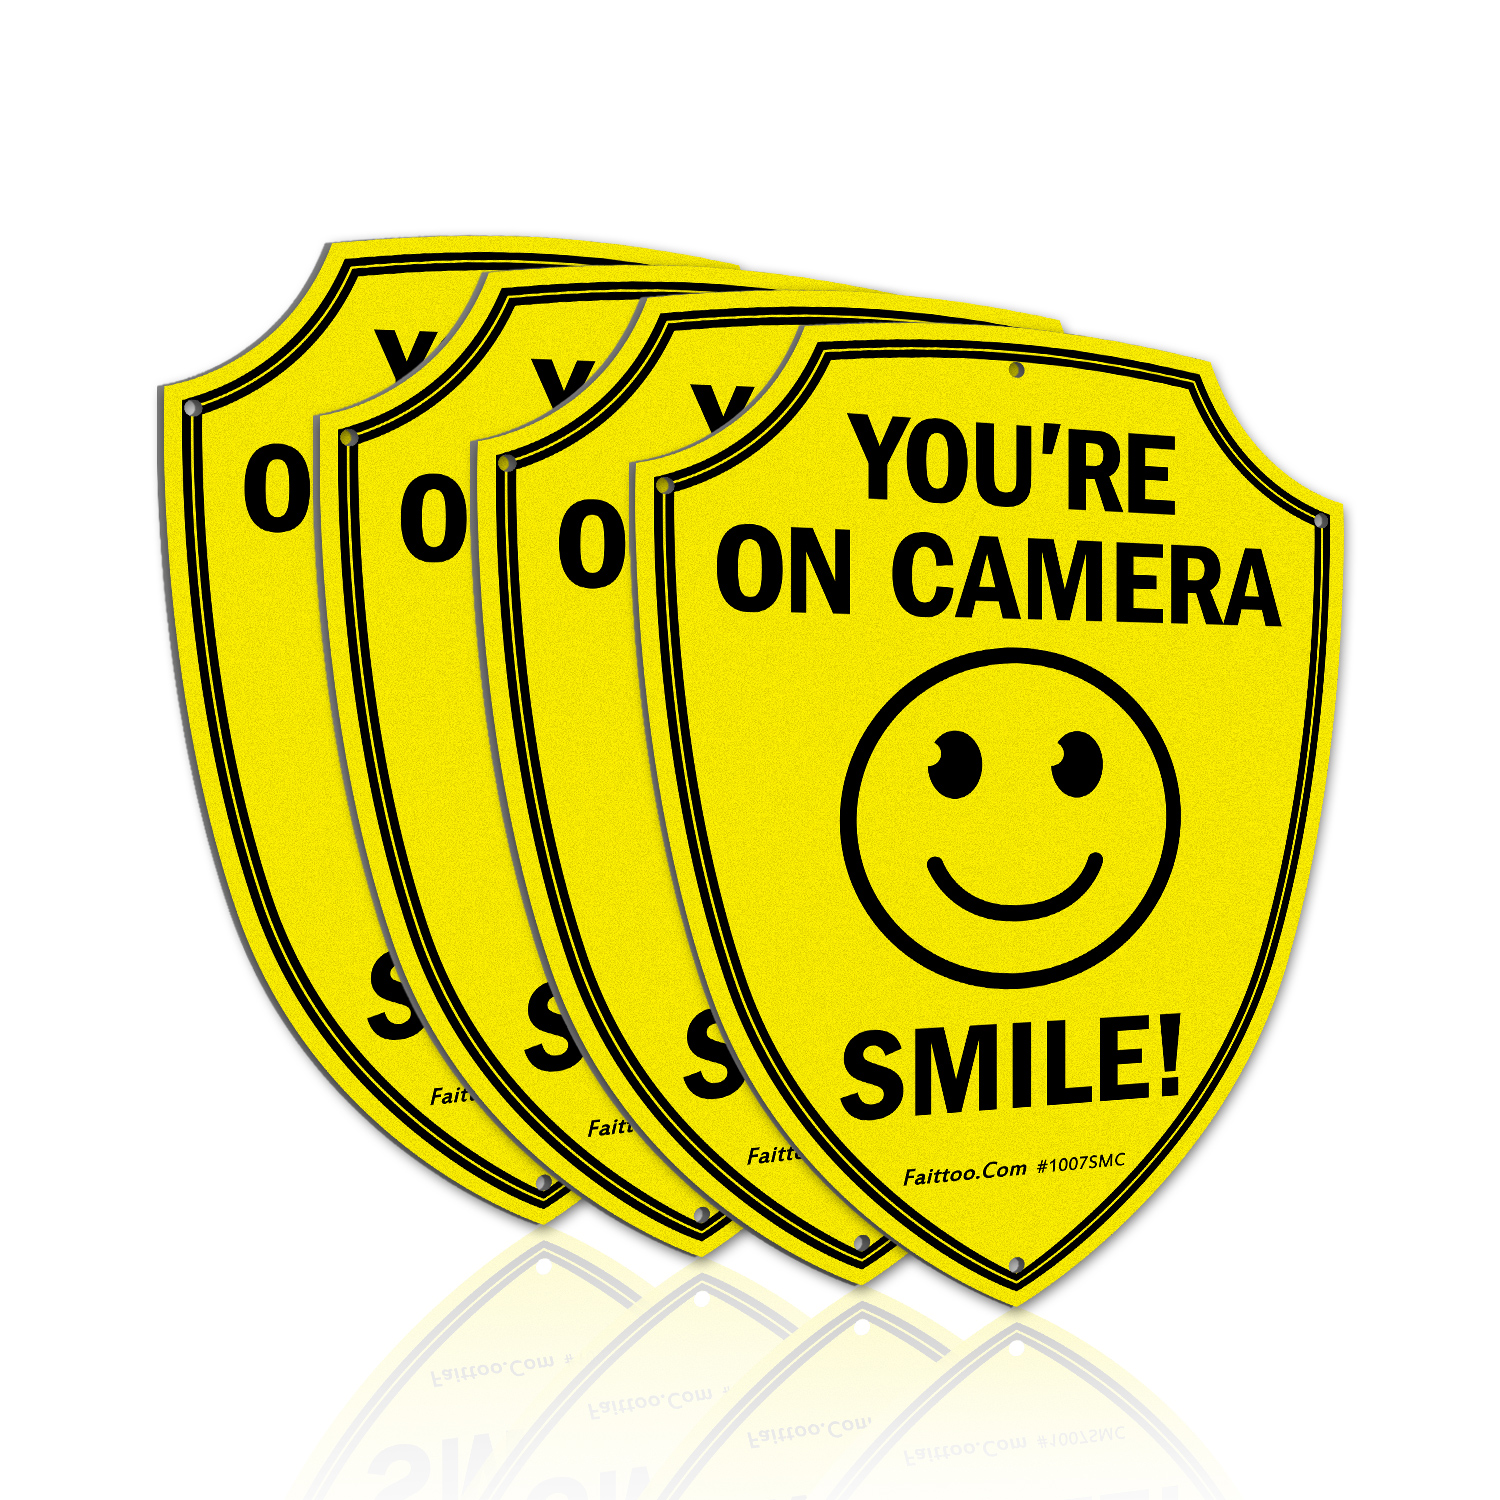 Faittoo Smile You're On Camera Sign, Video Surveillance Signs Outdoor, 4-Pack, 9.6 x 6.8 Inch Reflective Aluminum Warning Sign for Home Business CCTV Security Camera, Weather Resistant, Shield Shape